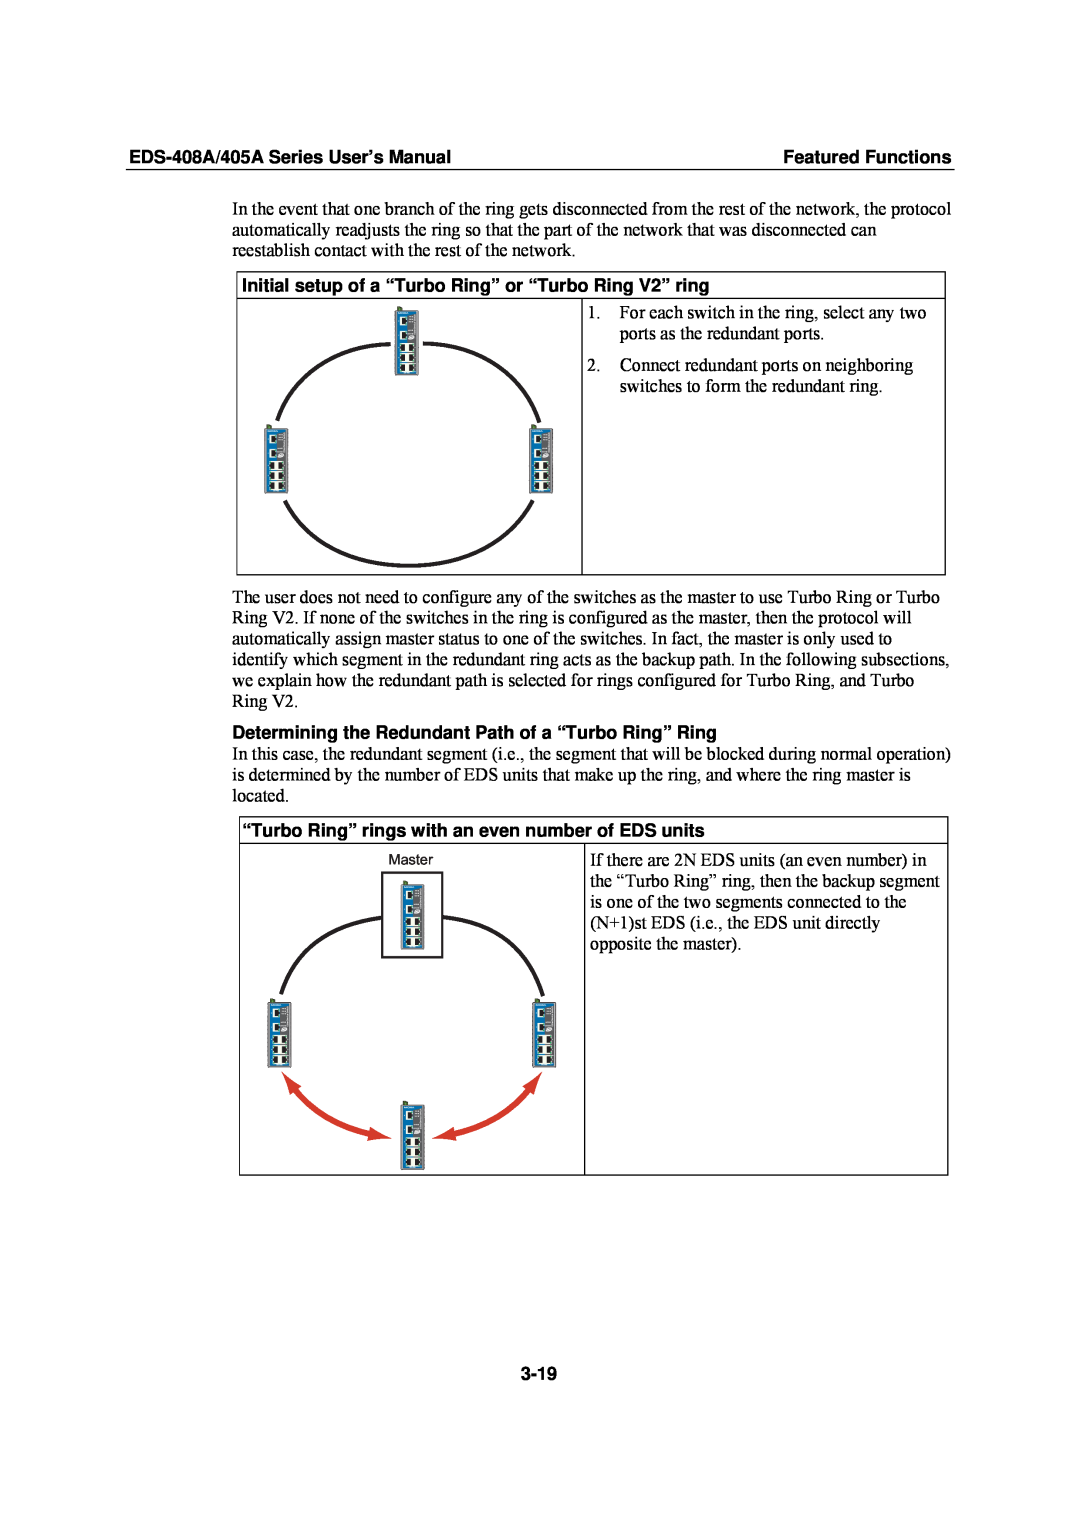 Moxa Technologies EDS-408A, EDS-405A Initial setup of a “Turbo Ring” or “Turbo Ring V2” ring, 3-19, Featured Functions 